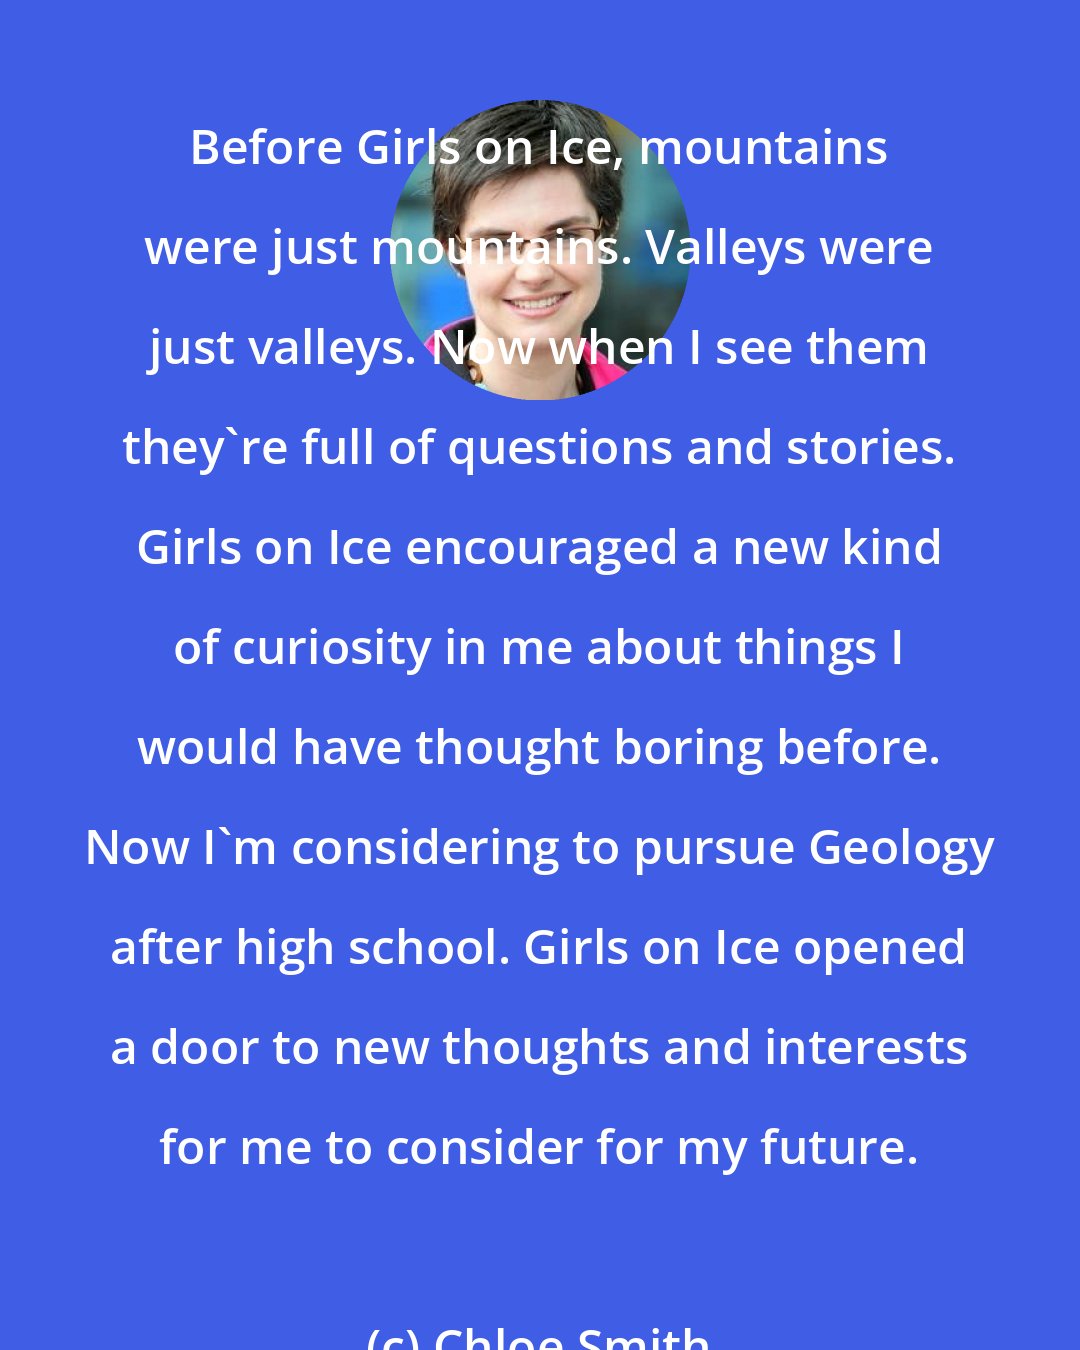 Chloe Smith: Before Girls on Ice, mountains were just mountains. Valleys were just valleys. Now when I see them they're full of questions and stories. Girls on Ice encouraged a new kind of curiosity in me about things I would have thought boring before. Now I'm considering to pursue Geology after high school. Girls on Ice opened a door to new thoughts and interests for me to consider for my future.